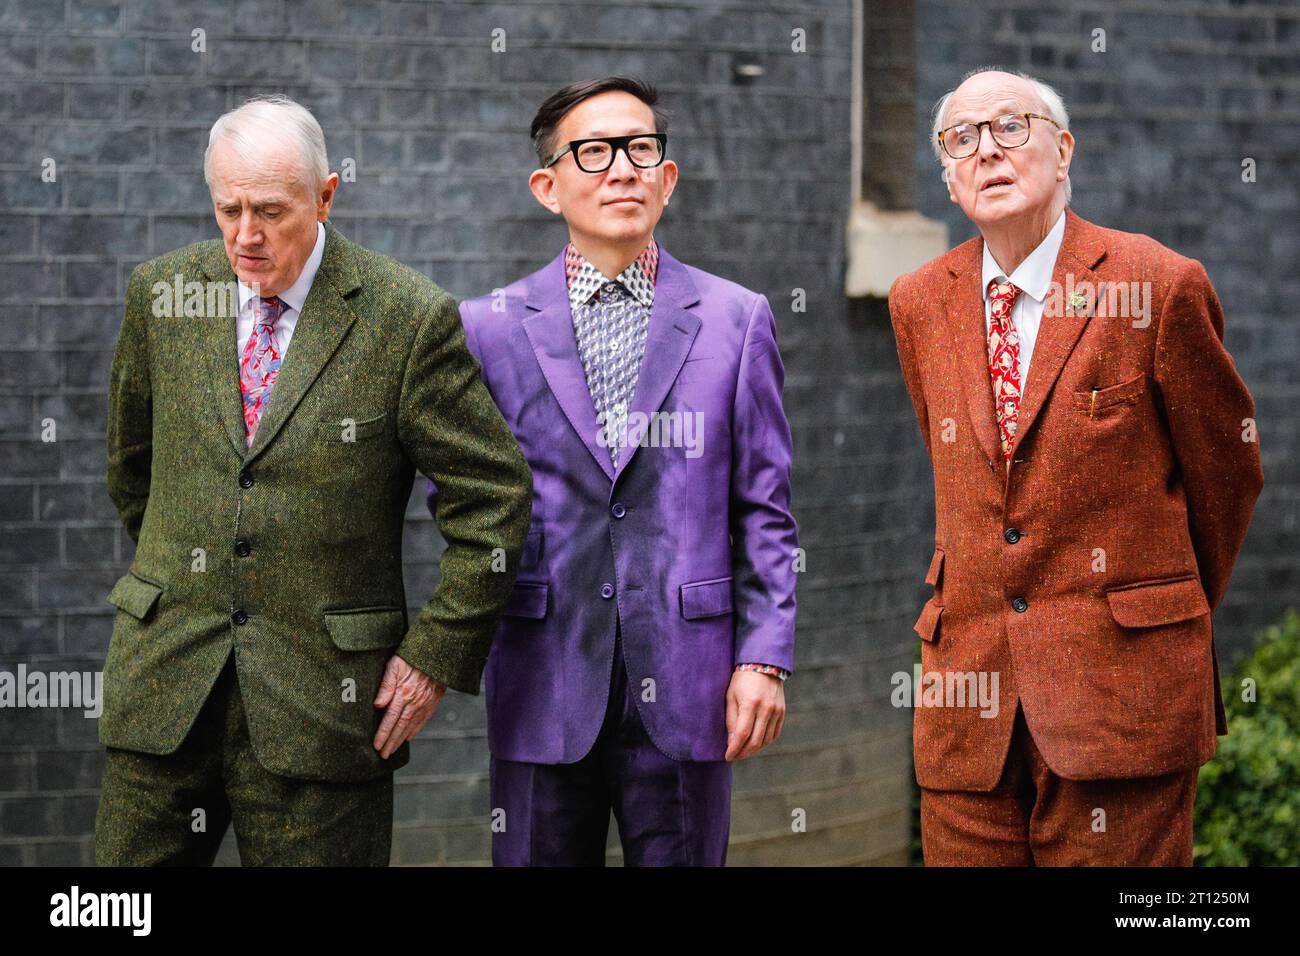 London, UK. 10th Oct, 2023. British artist duo Gilbert and George (Gilbert Prousch, sometimes referred to as Proesch, and George Passmore) attend a reception at 10 Downing Street to celebrate 20 years of Frieze London Art Fair. They arrive together with other invitees. Frieze 2023 will officially start tomorrow with its preview day. Credit: Imageplotter/Alamy Live News Stock Photo